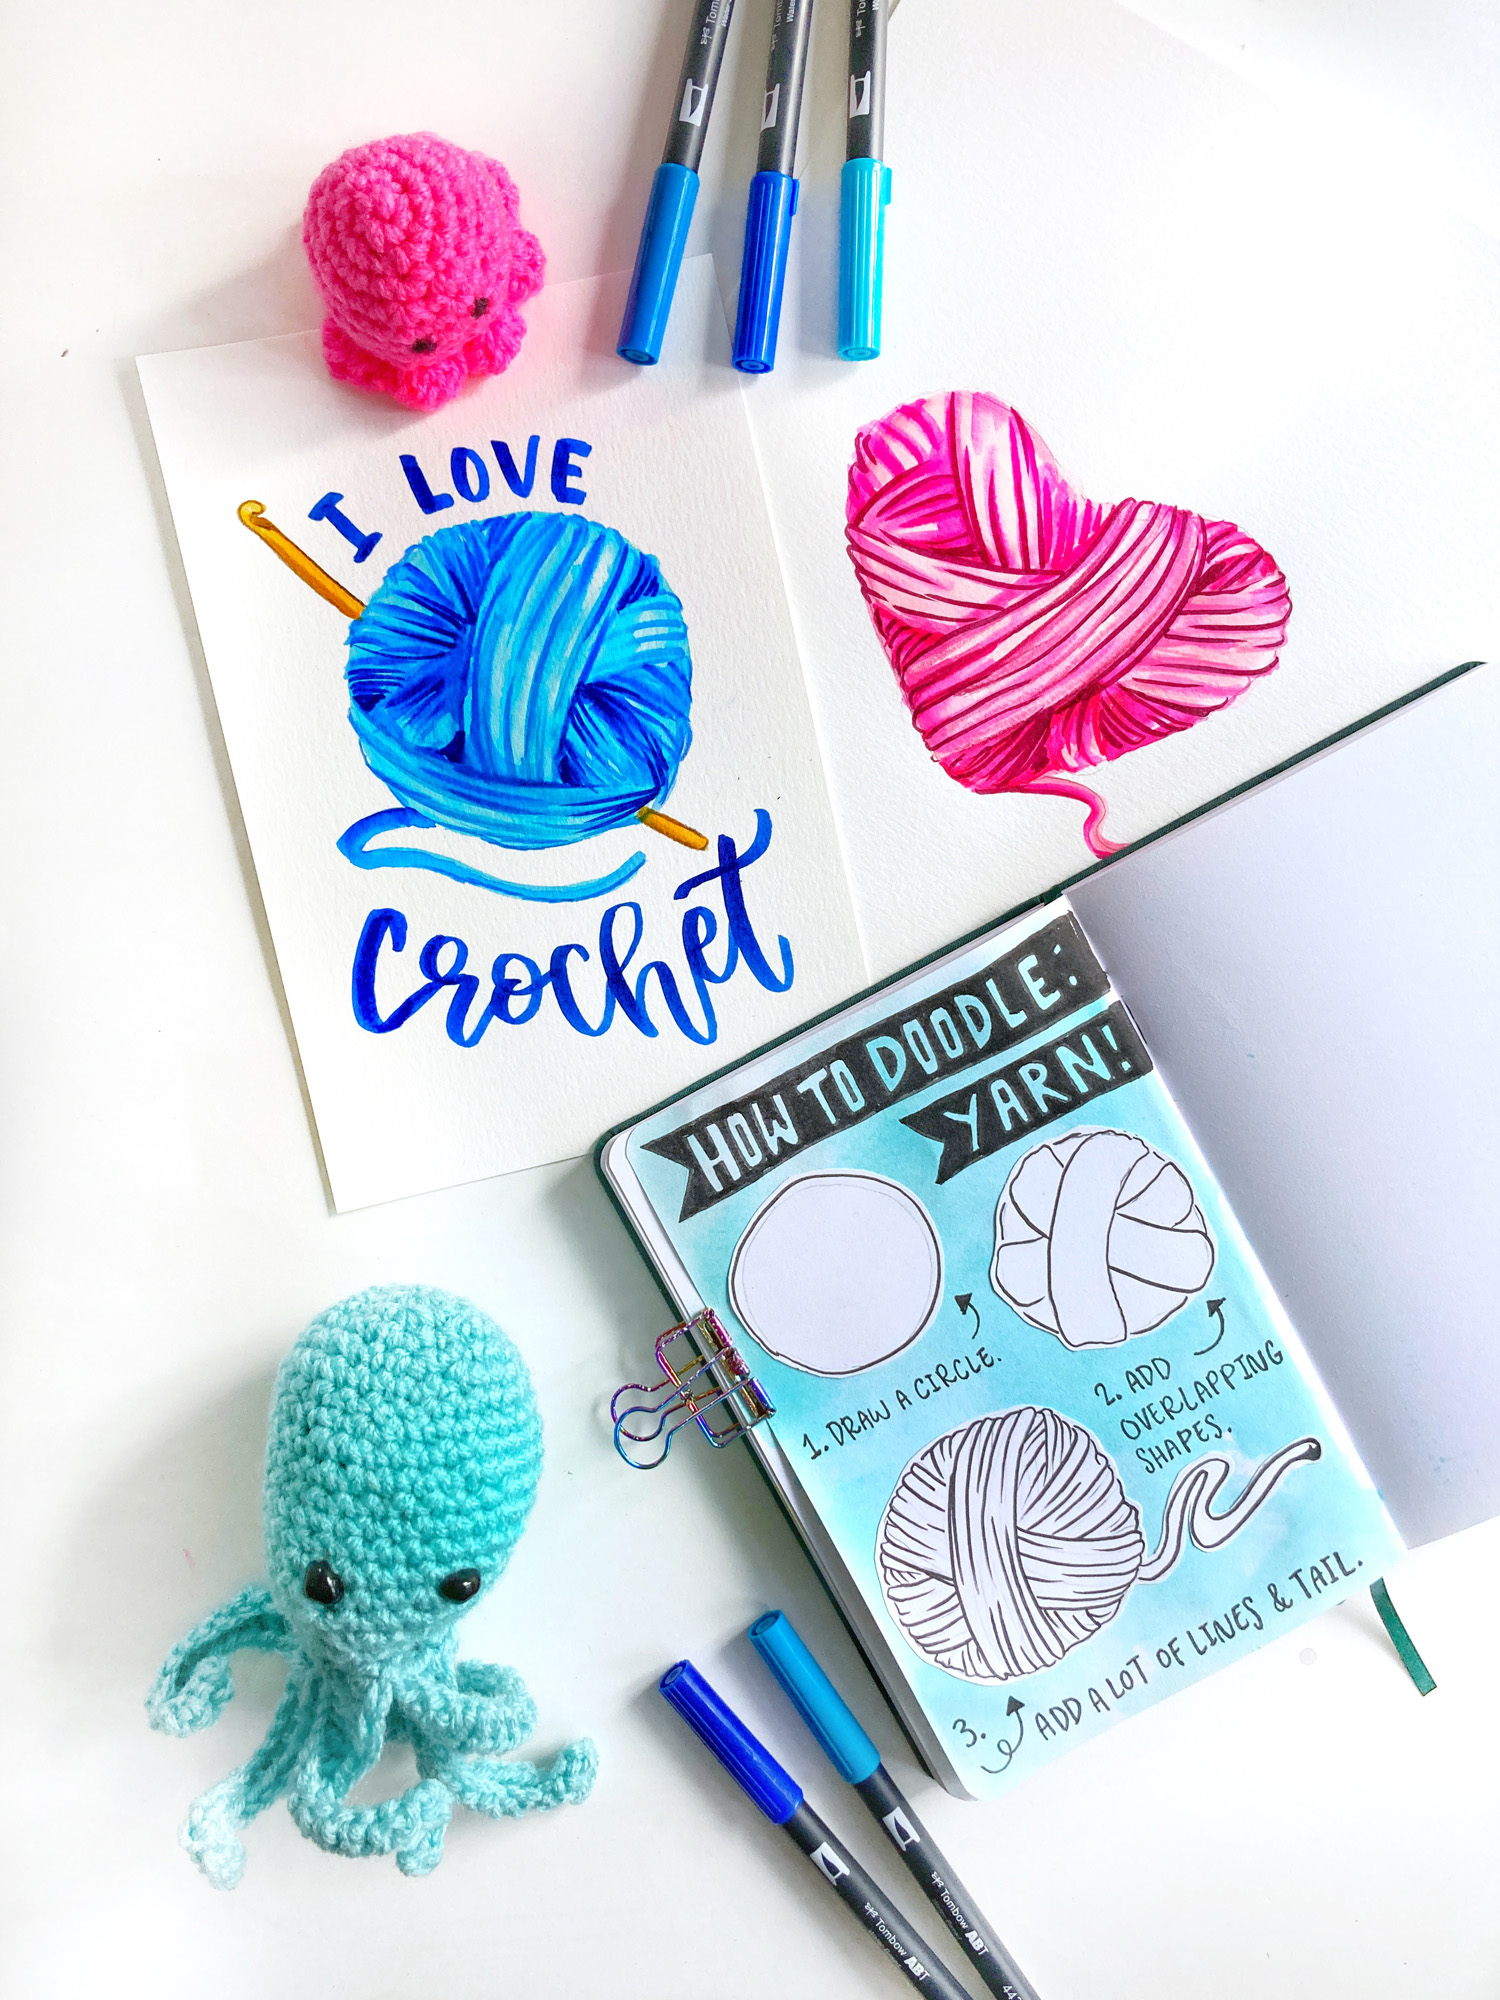 How to Make Paper  Knitting, Crochet and Crafts